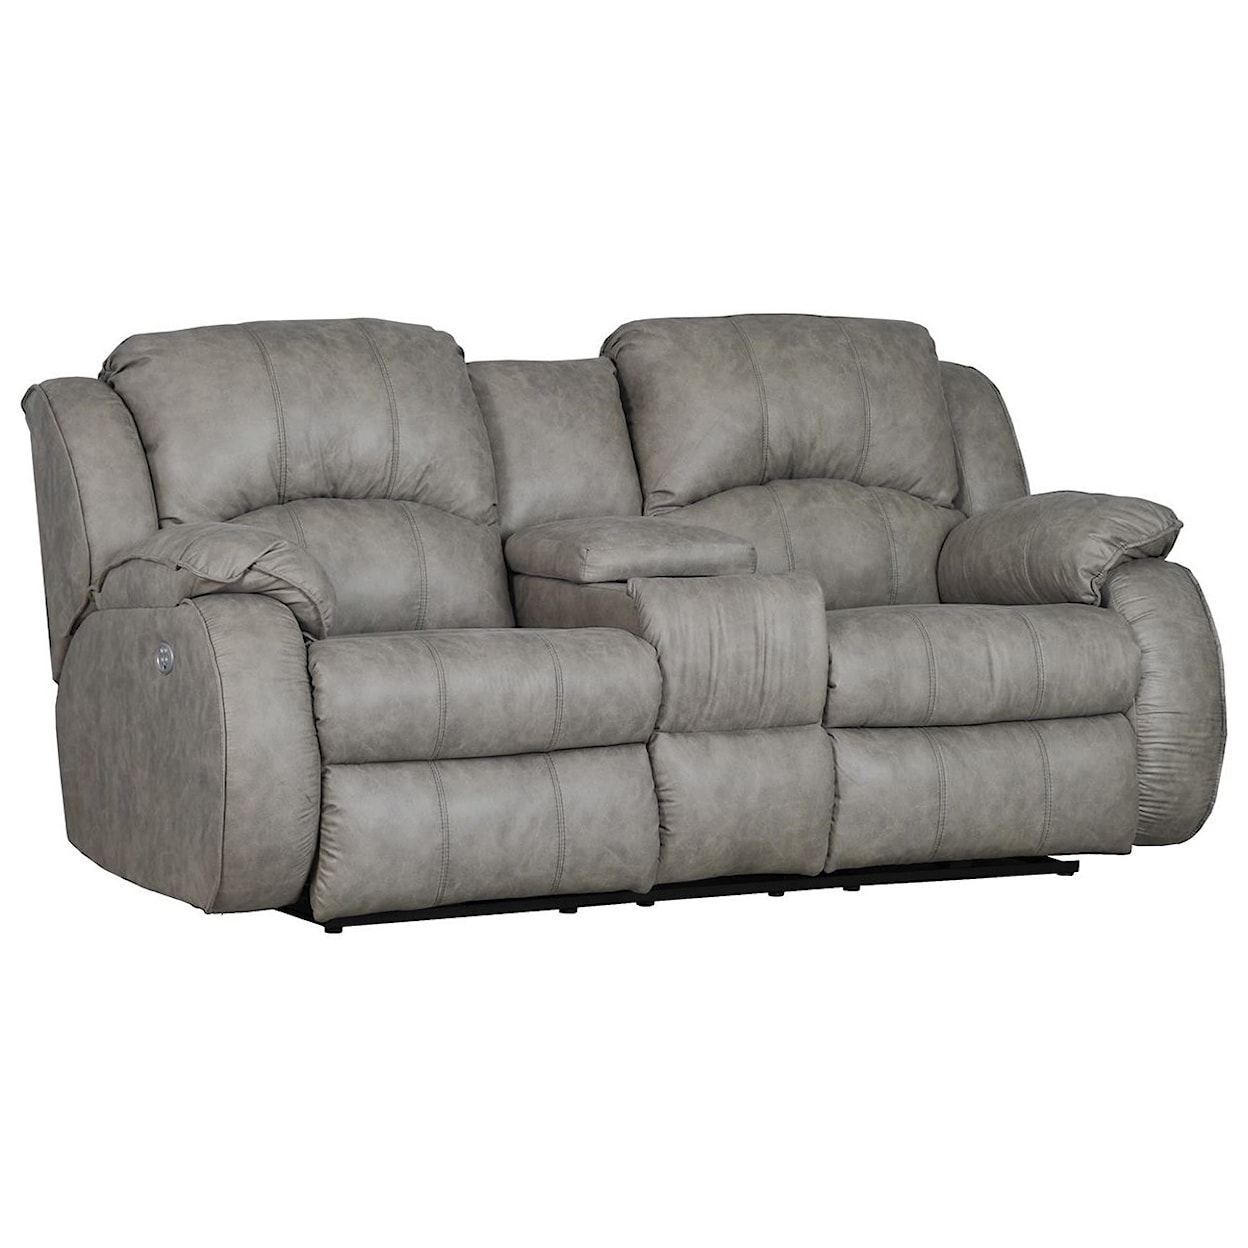 Southern Motion Cagney Power Reclining Loveseat